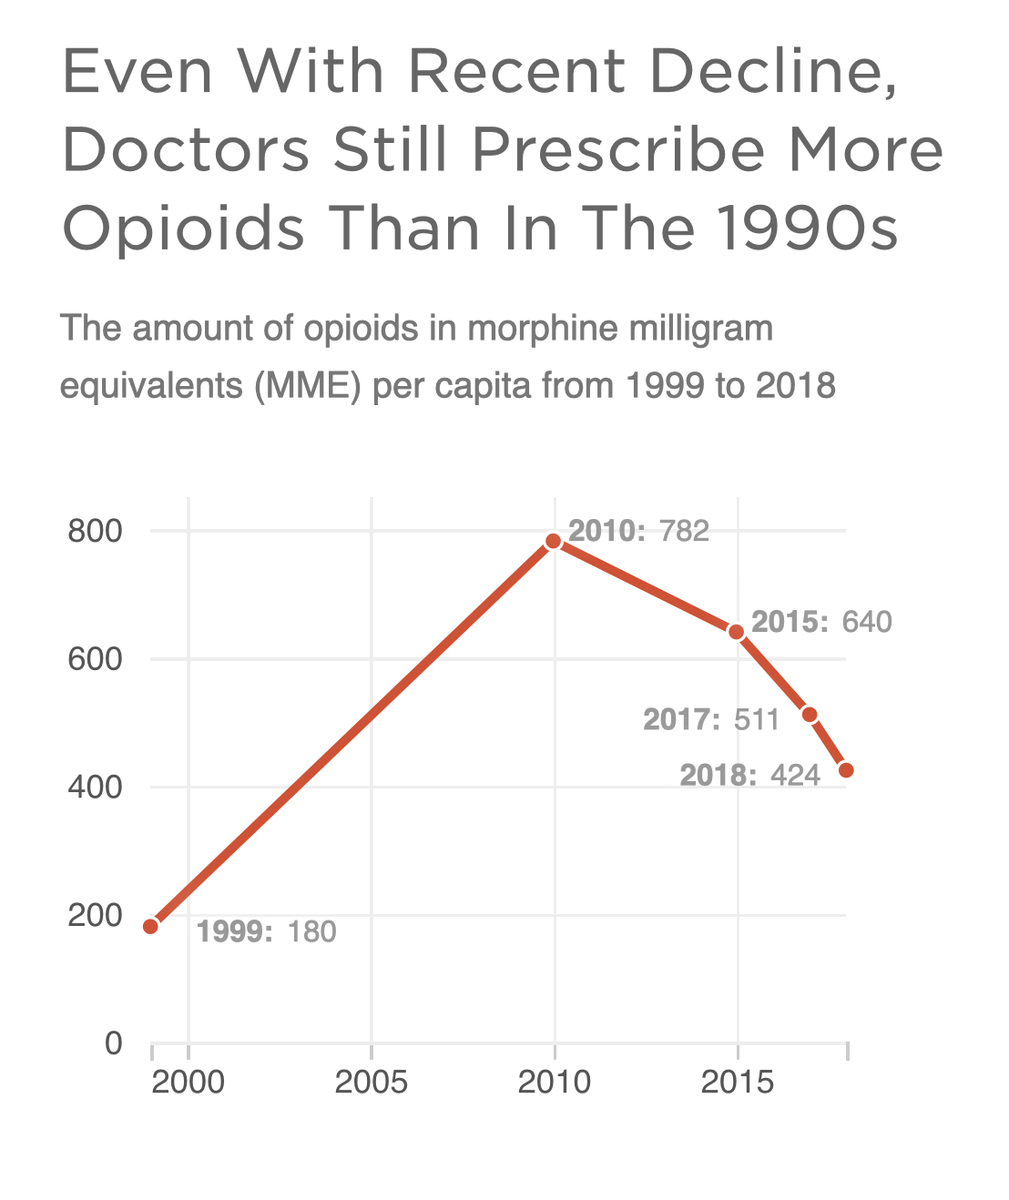 6/Of more serious concern was NPR's deployment of “total milligrams” being still higher than in 1999 as a sign of refractory ignorance by doctors, without asking, like a reporter would ask, what the numbers *mean*. Because we published that in 2019.  https://onlinelibrary.wiley.com/doi/abs/10.1111/add.14394